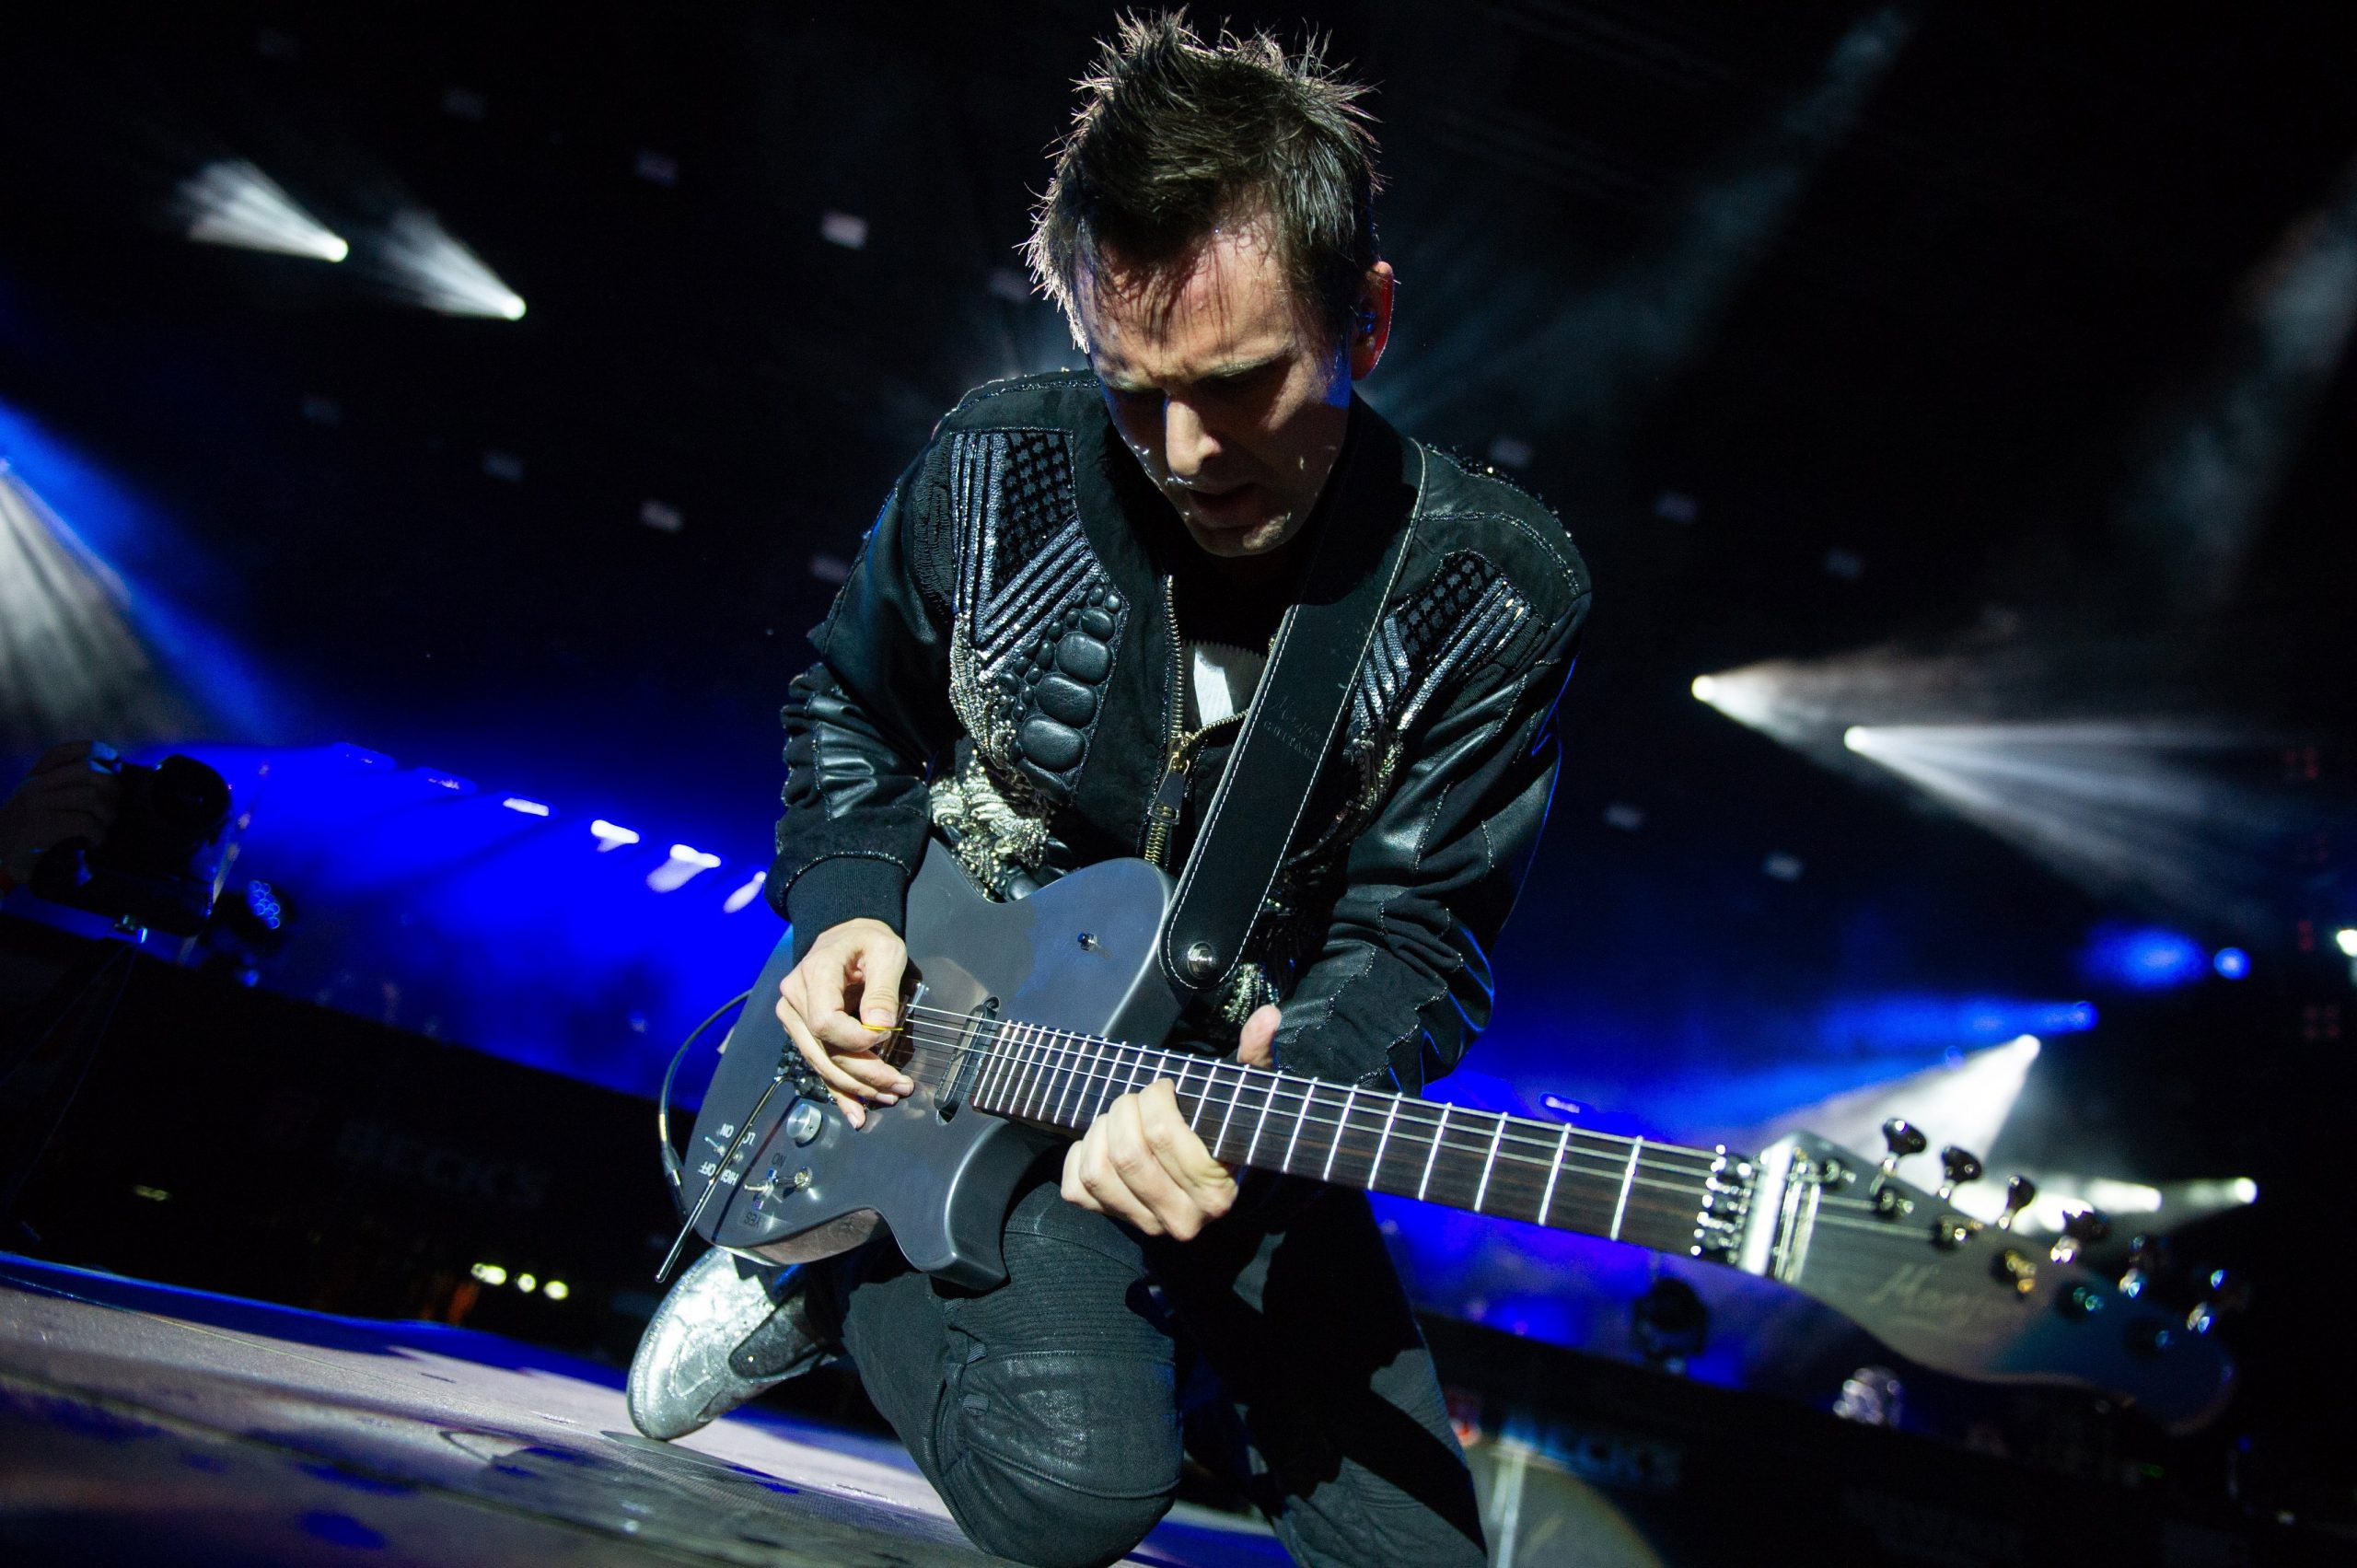 Volt Festival 2022: Muse, The Killers, SUM41, Bring Me the Horizon, and Yungblud